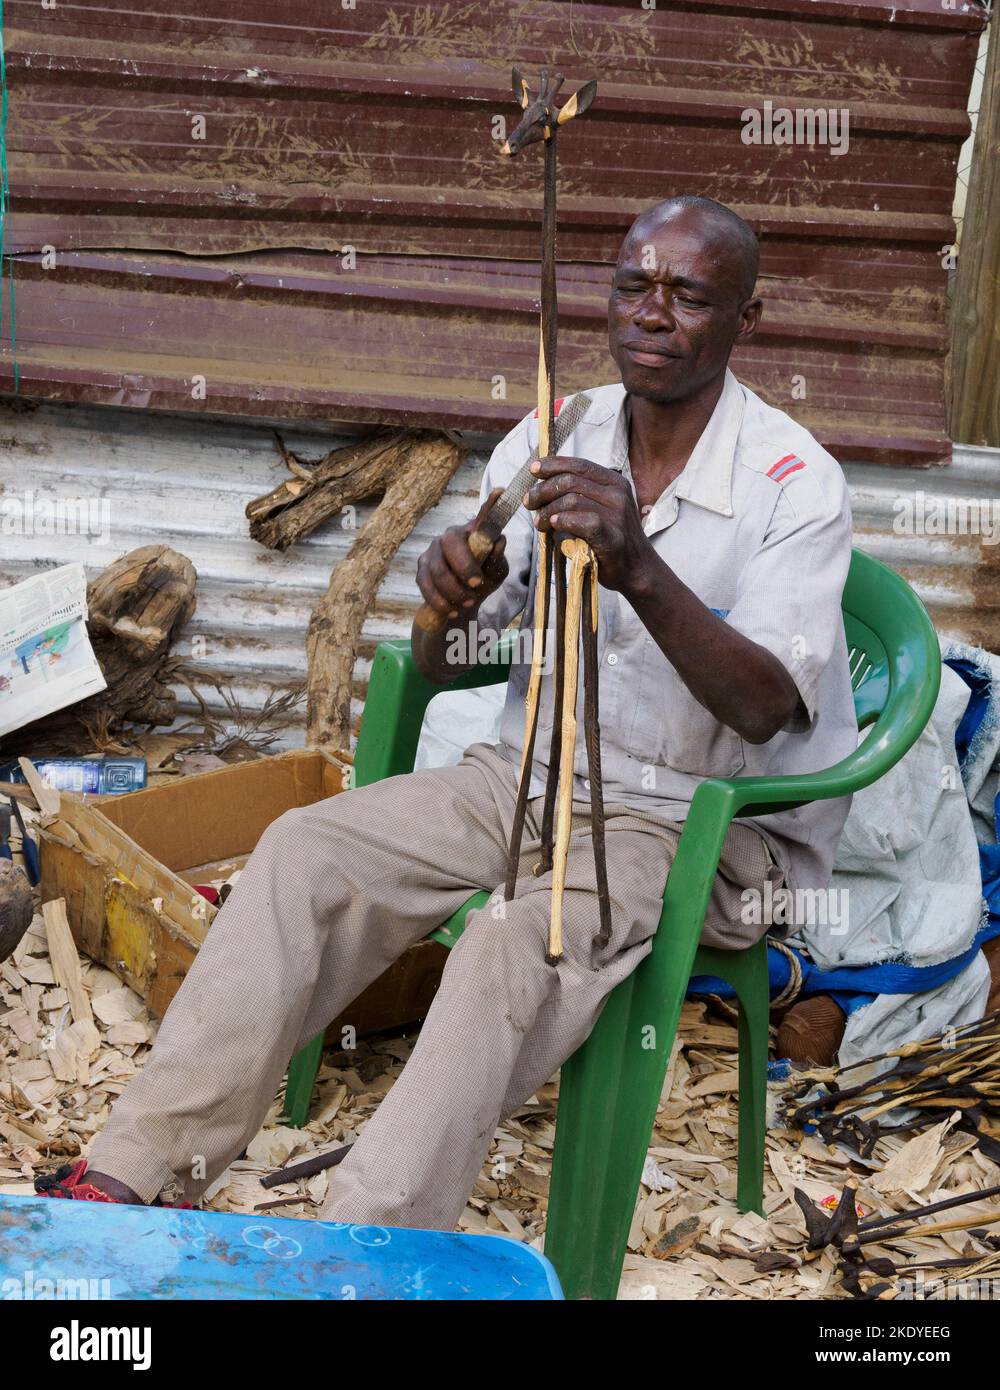 Craftsman producing wood carvings for the tourist market in a craft centre in Nairobi Kenya Stock Photo